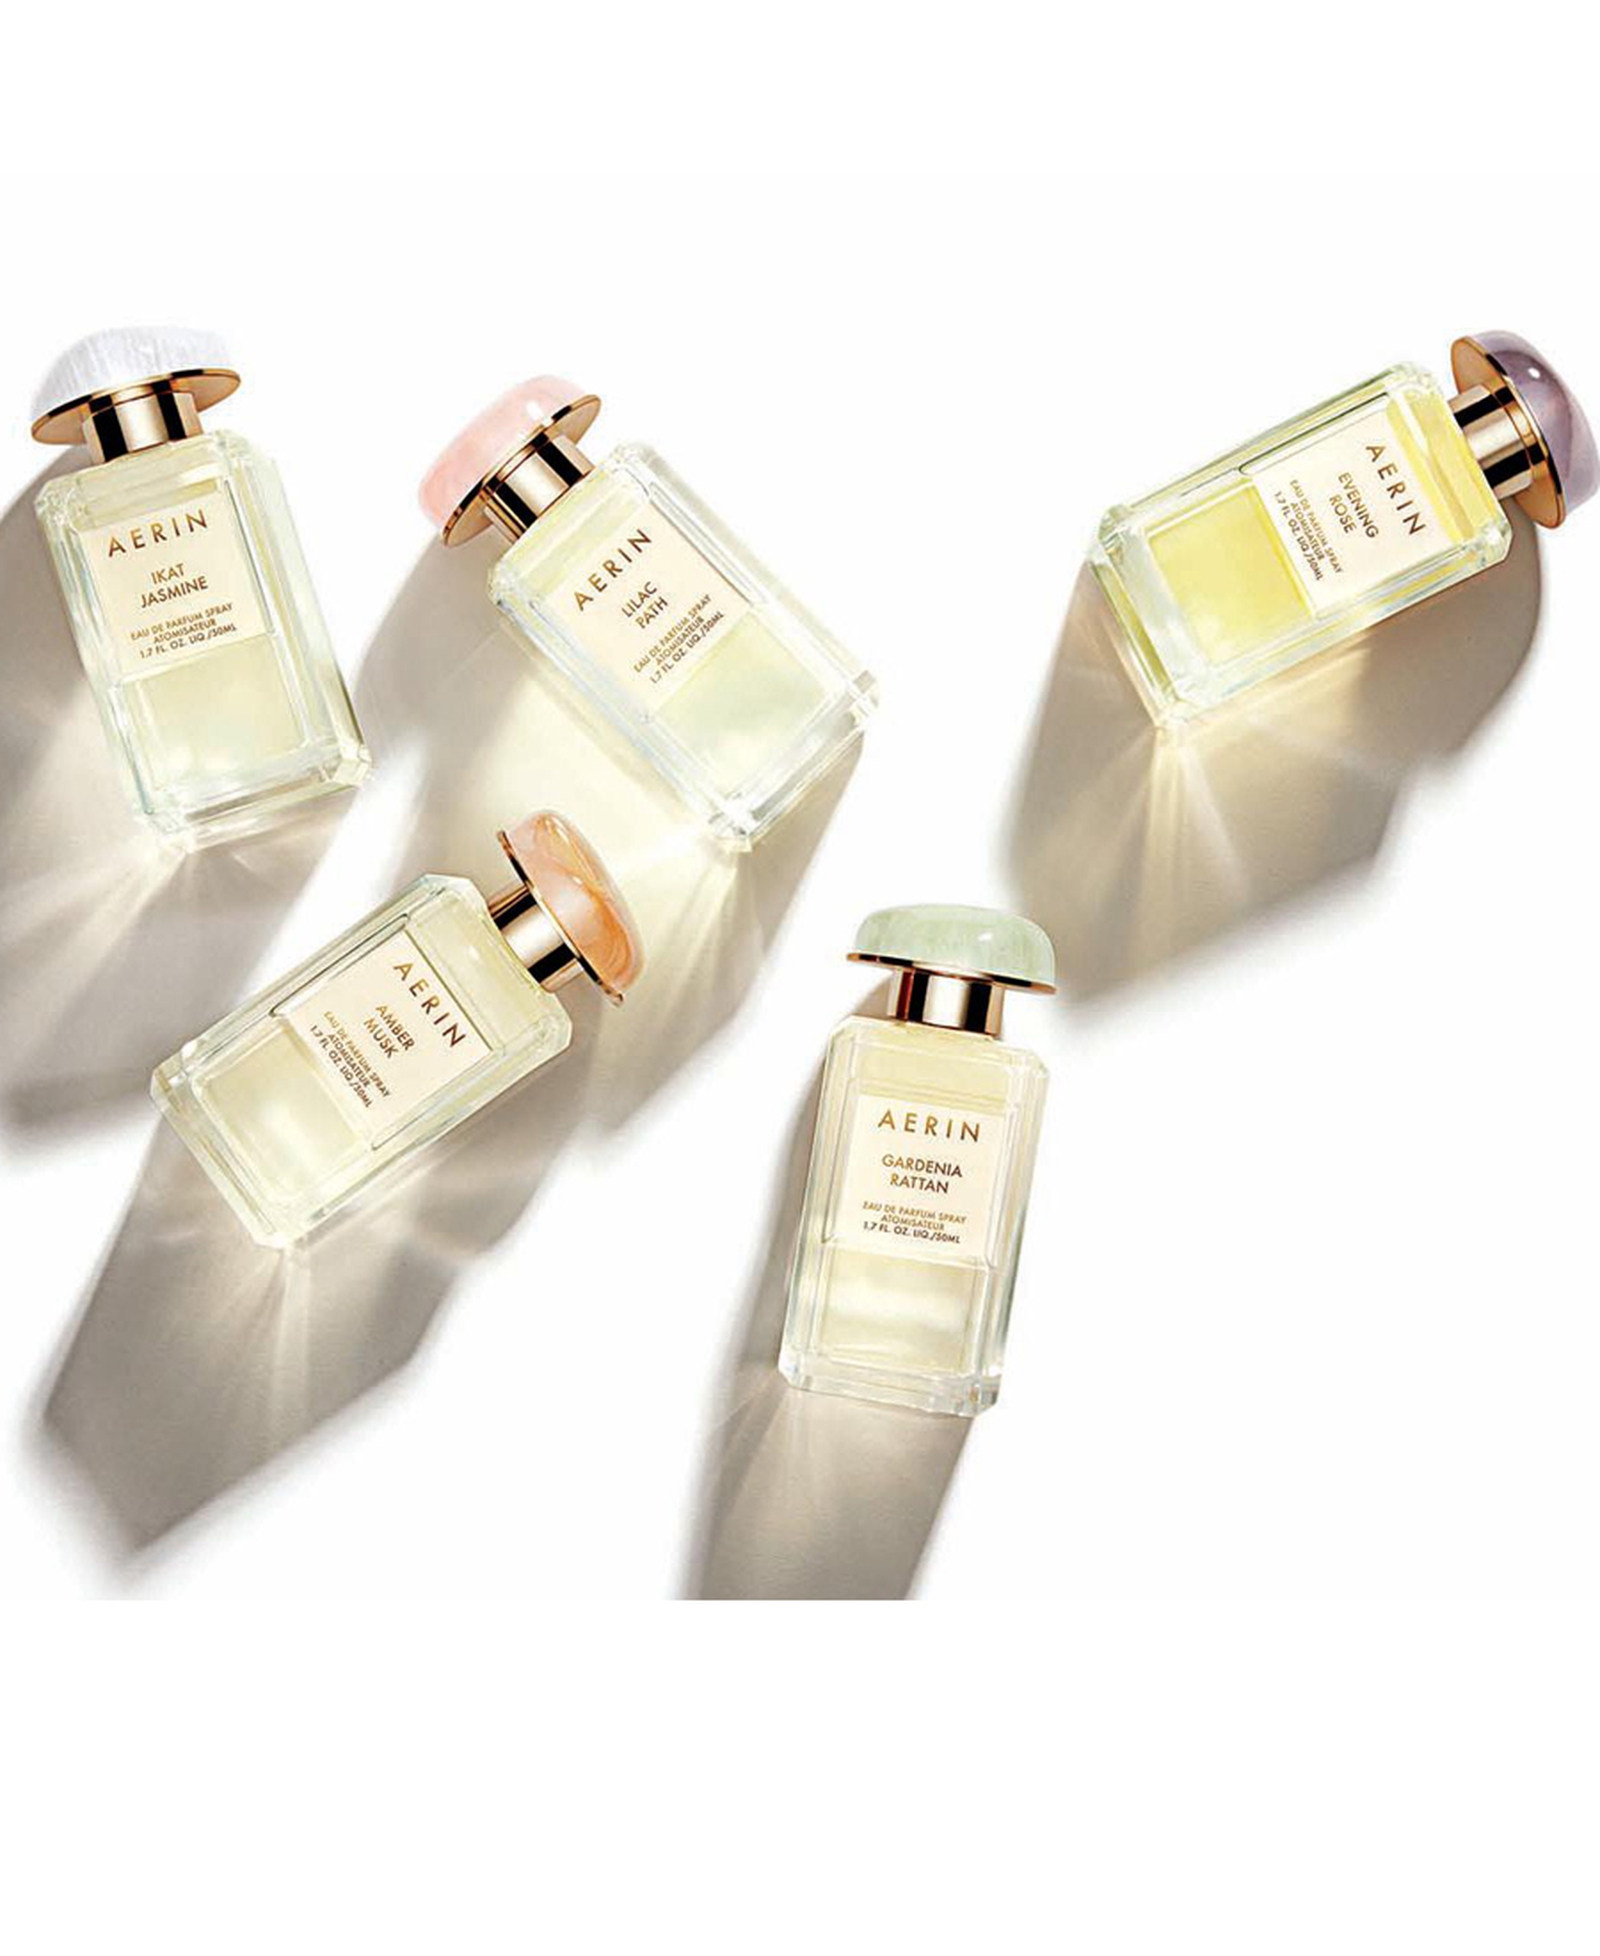 The Aerin Collection